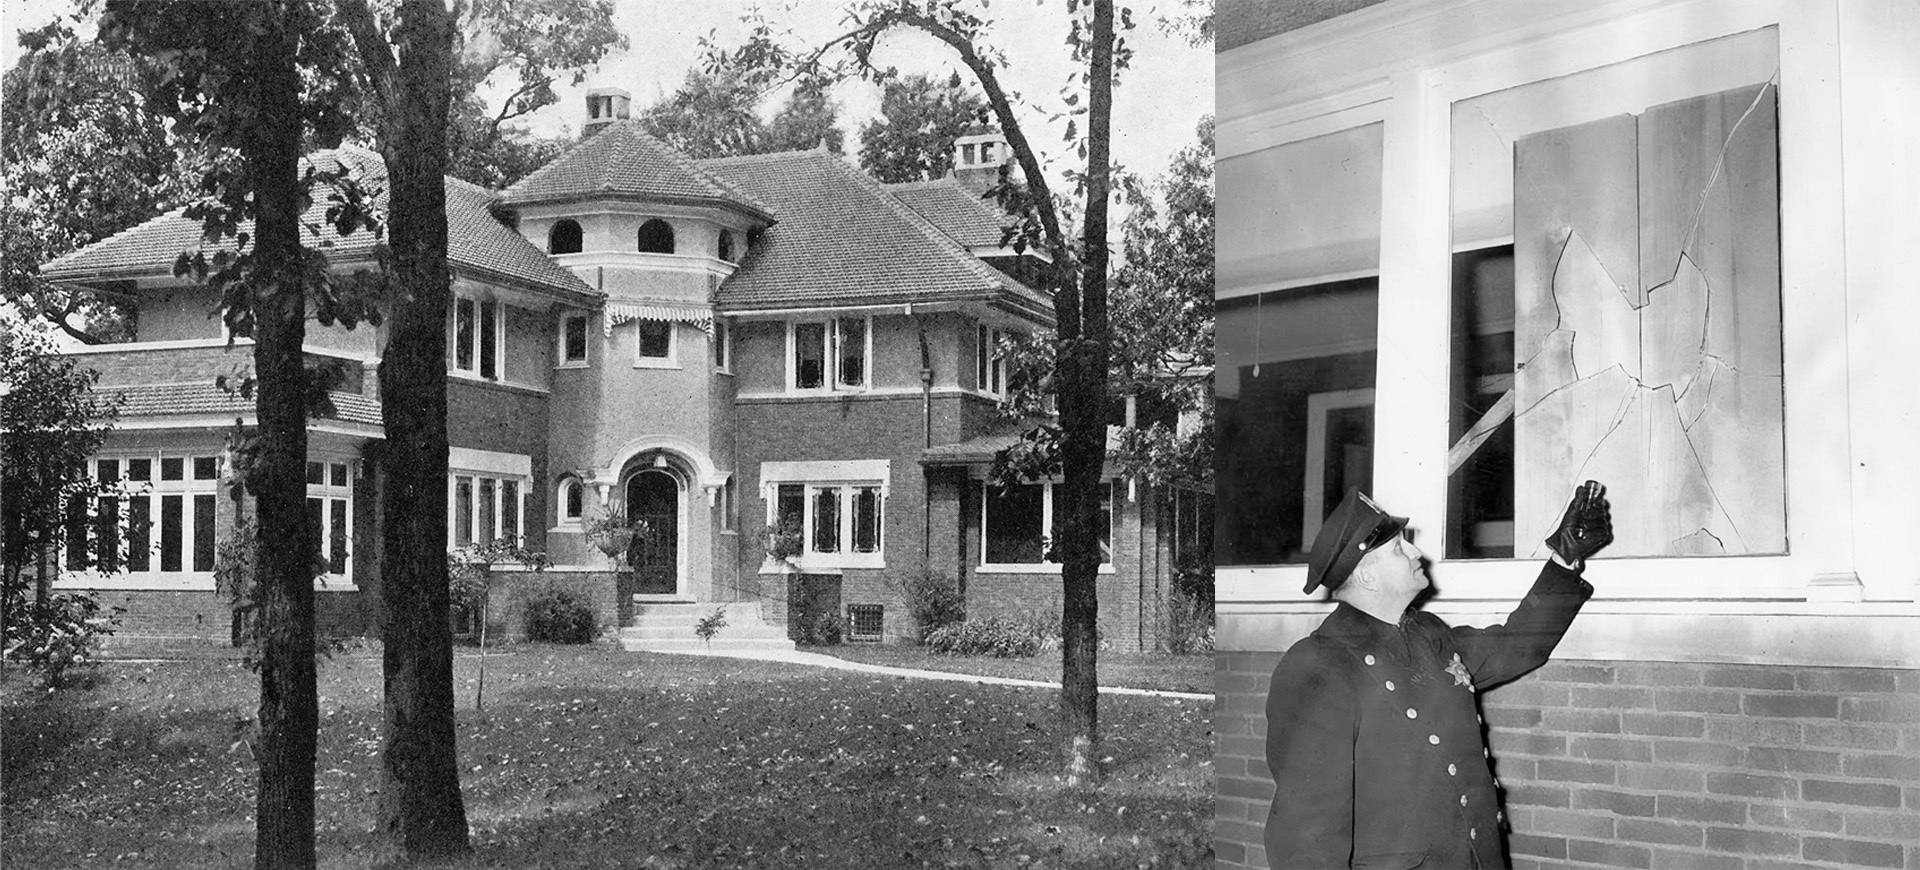 Drs. Percy and Anna Julian purchased this home in Oak Park's estate section in 1950 and began to renovate it but the house was firebombed before they had the chance to move in. The next year someone hurled a stick of dynamite at the house. The incidents caused many in Oak Park to rally to the Julian's aid and to examine community attitudes and policies on race and open housing.